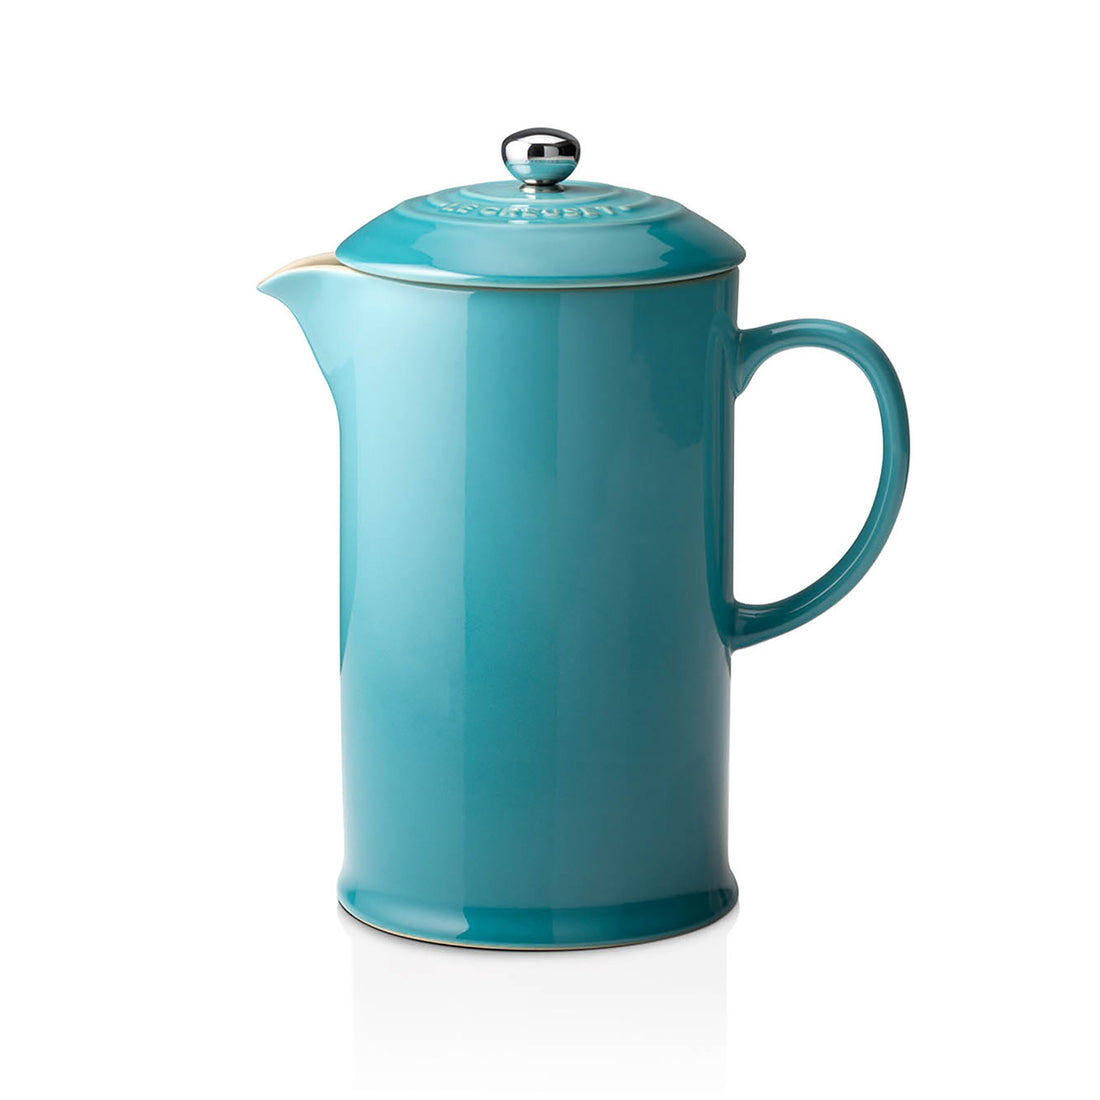 Le Creuset, Le Creuset Stoneware Cafetiere - Teal, Redber Coffee